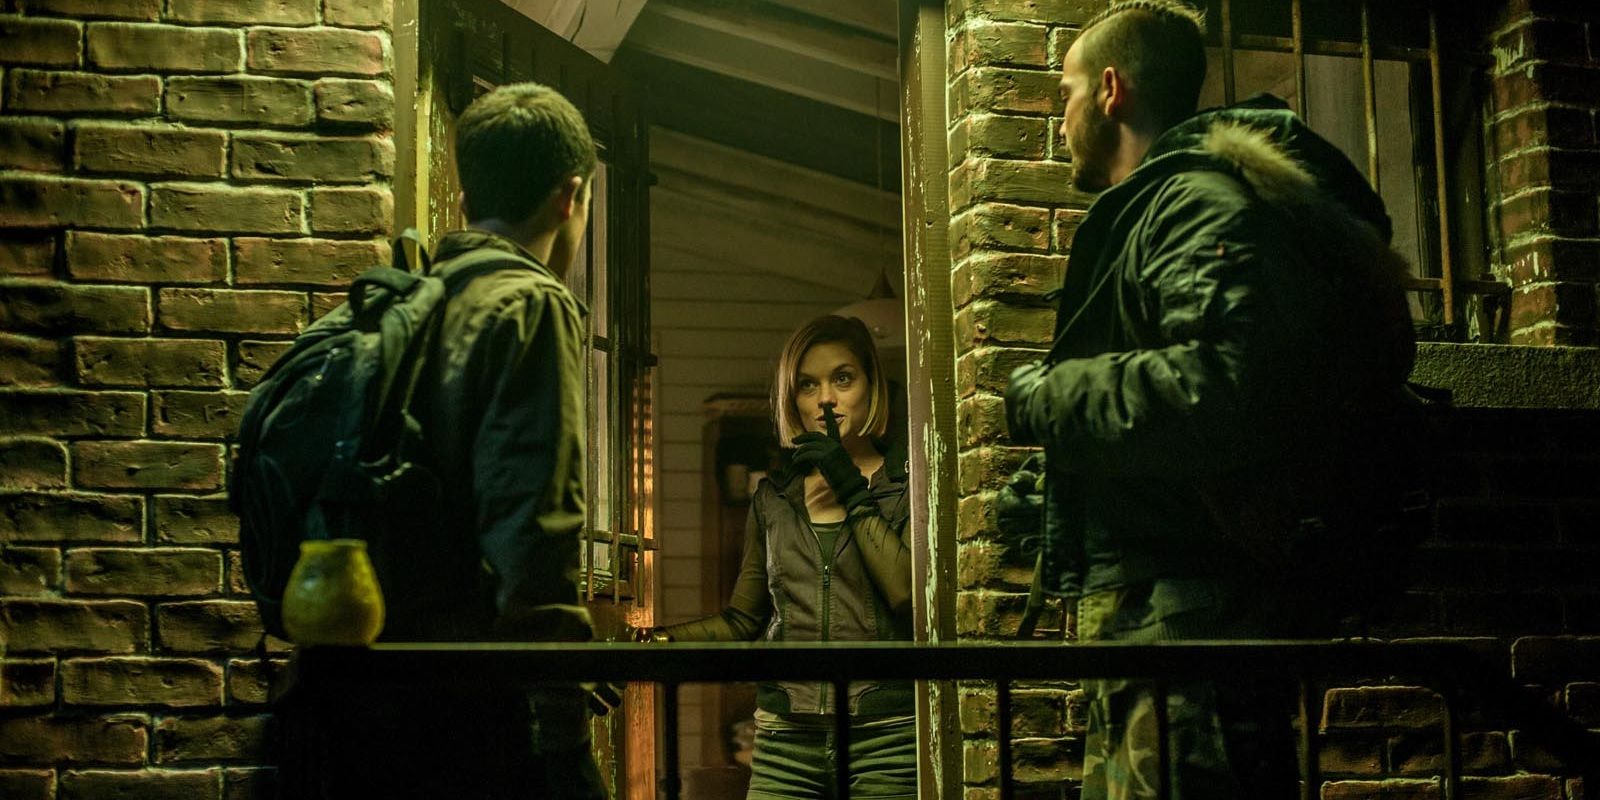 Dylan Minnette, Jane Levy, and Daniel Zovatto in Don't Breathe